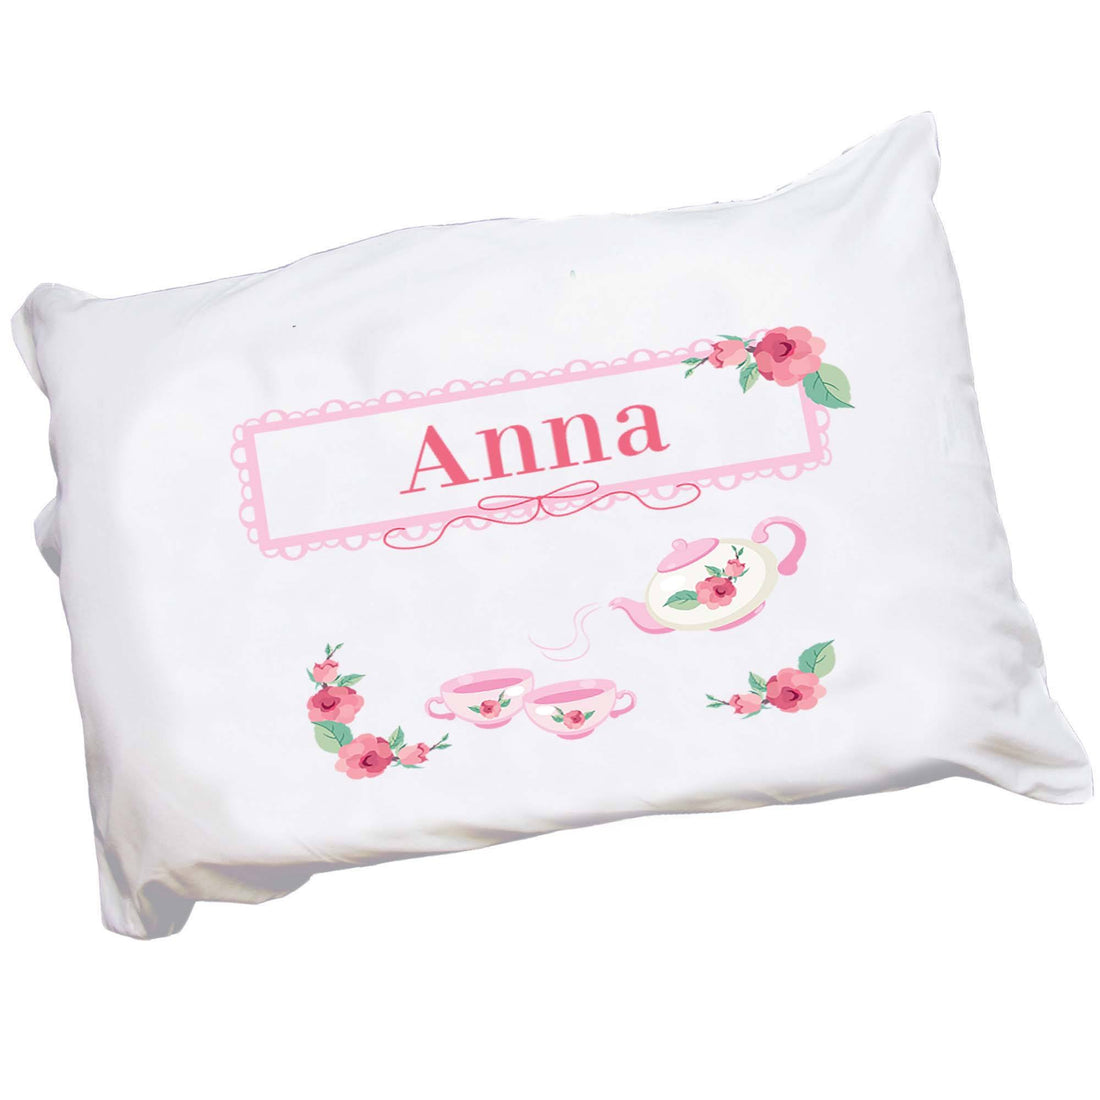 Personalized Childrens Pillowcase with Tea Party design